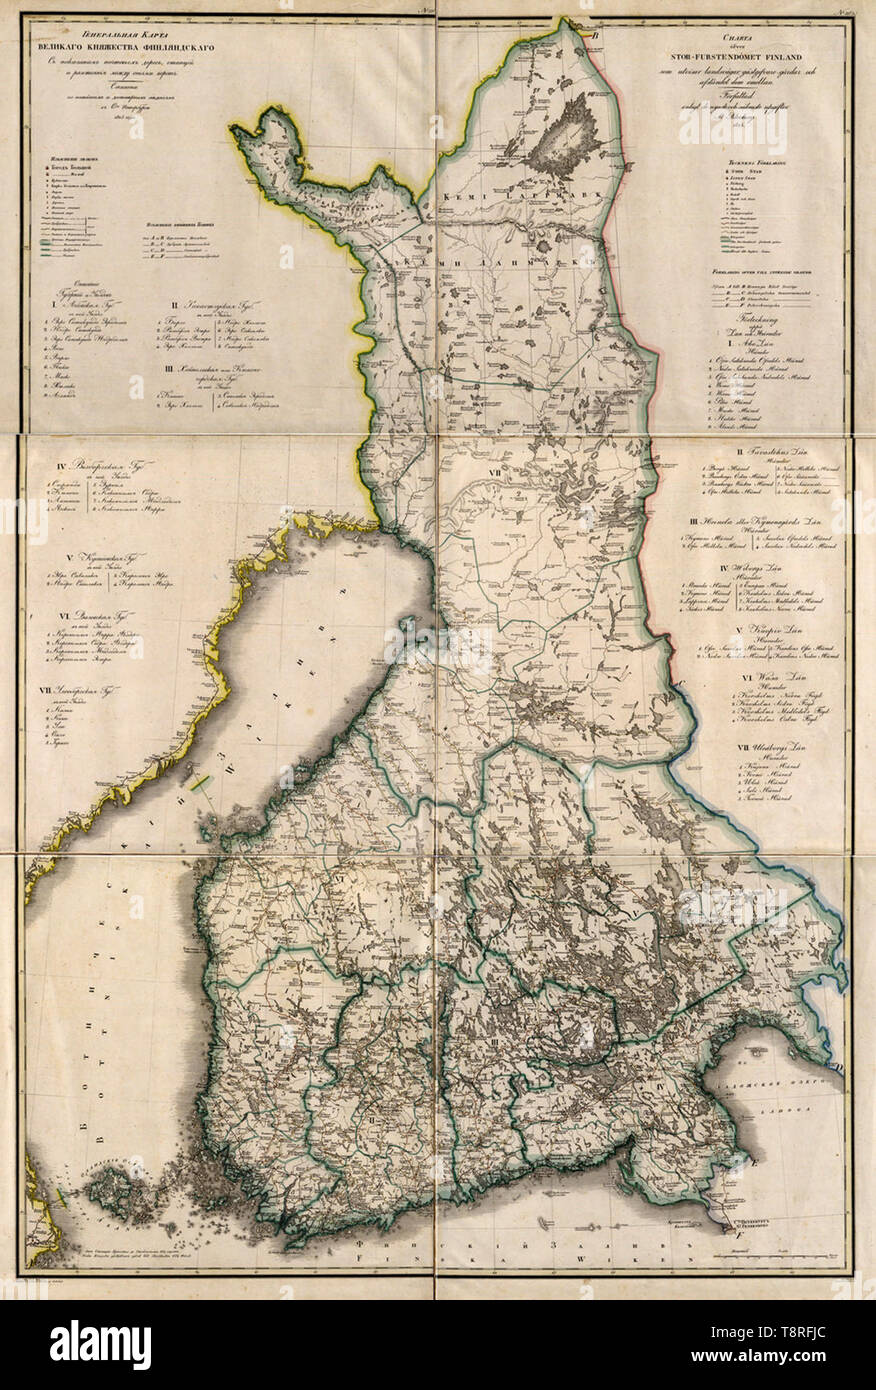 This 1825 map of the Grand Duchy of Finland is from a larger work, Geographical atlas of the Russian Empire, the Kingdom of Poland, and the Grand Duchy of Finland (Geograficheskii atlas Rossiiskoi imperii, tsarstva Pol'skogo i velikogo kniazhestva Finliandskogo), containing 61 maps of the Russian Empire. Compiled and engraved by Colonel V. P. Piadyshev, it reflects the detailed mapping carried out by Russian military cartographers in the first quarter of the 19th century Stock Photo